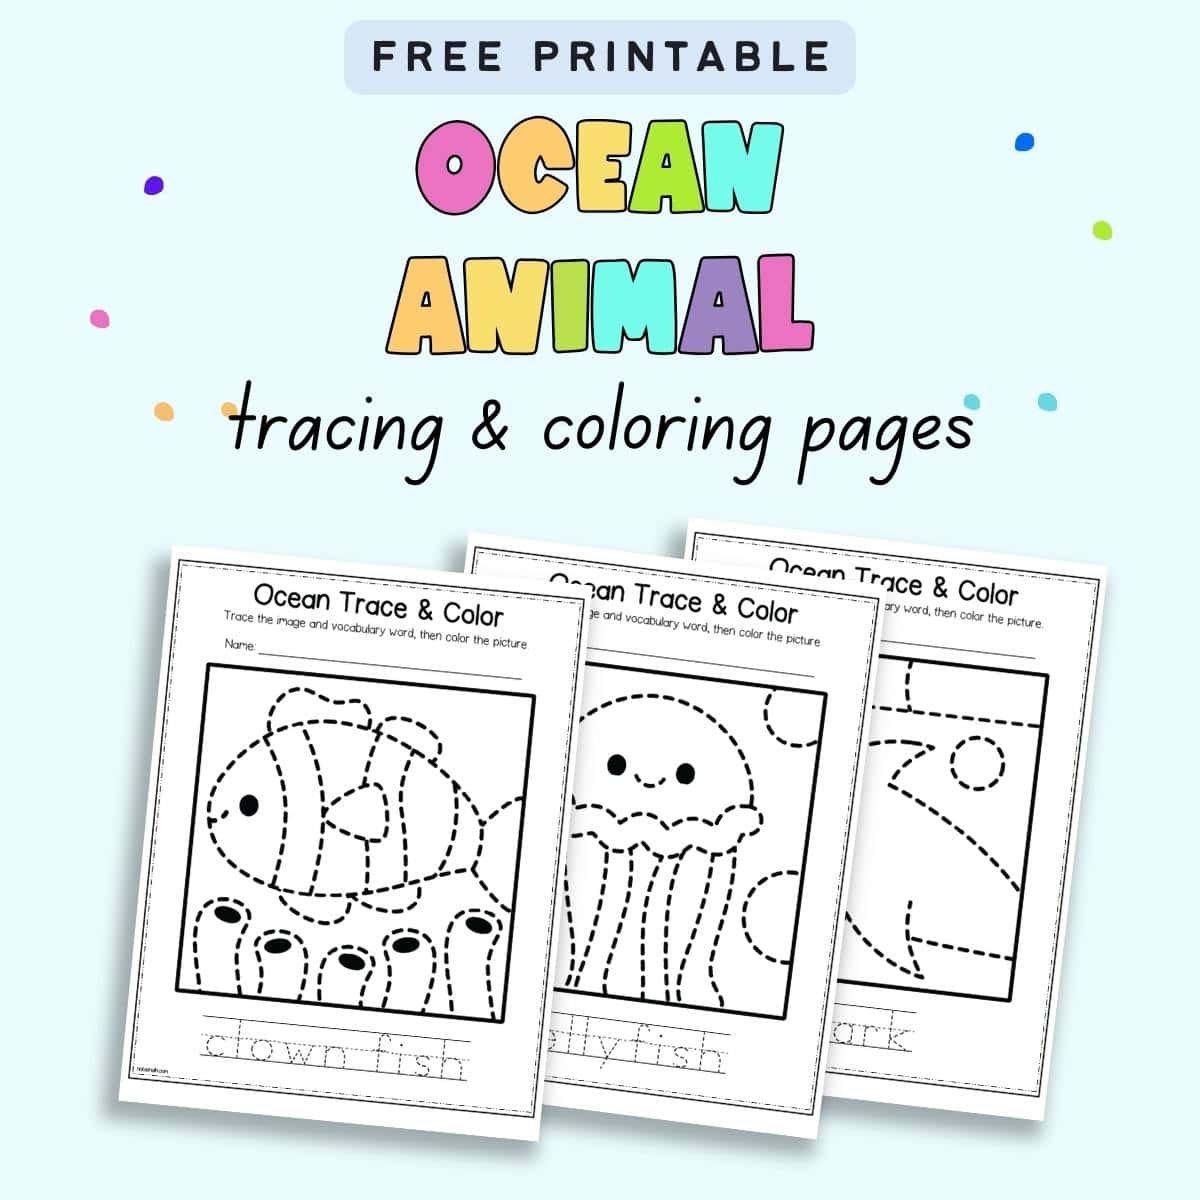 Text "free printable ocean animal tracing and coloring pages" with a preview of three coloring pages with ocean animal vocabulary to trace.